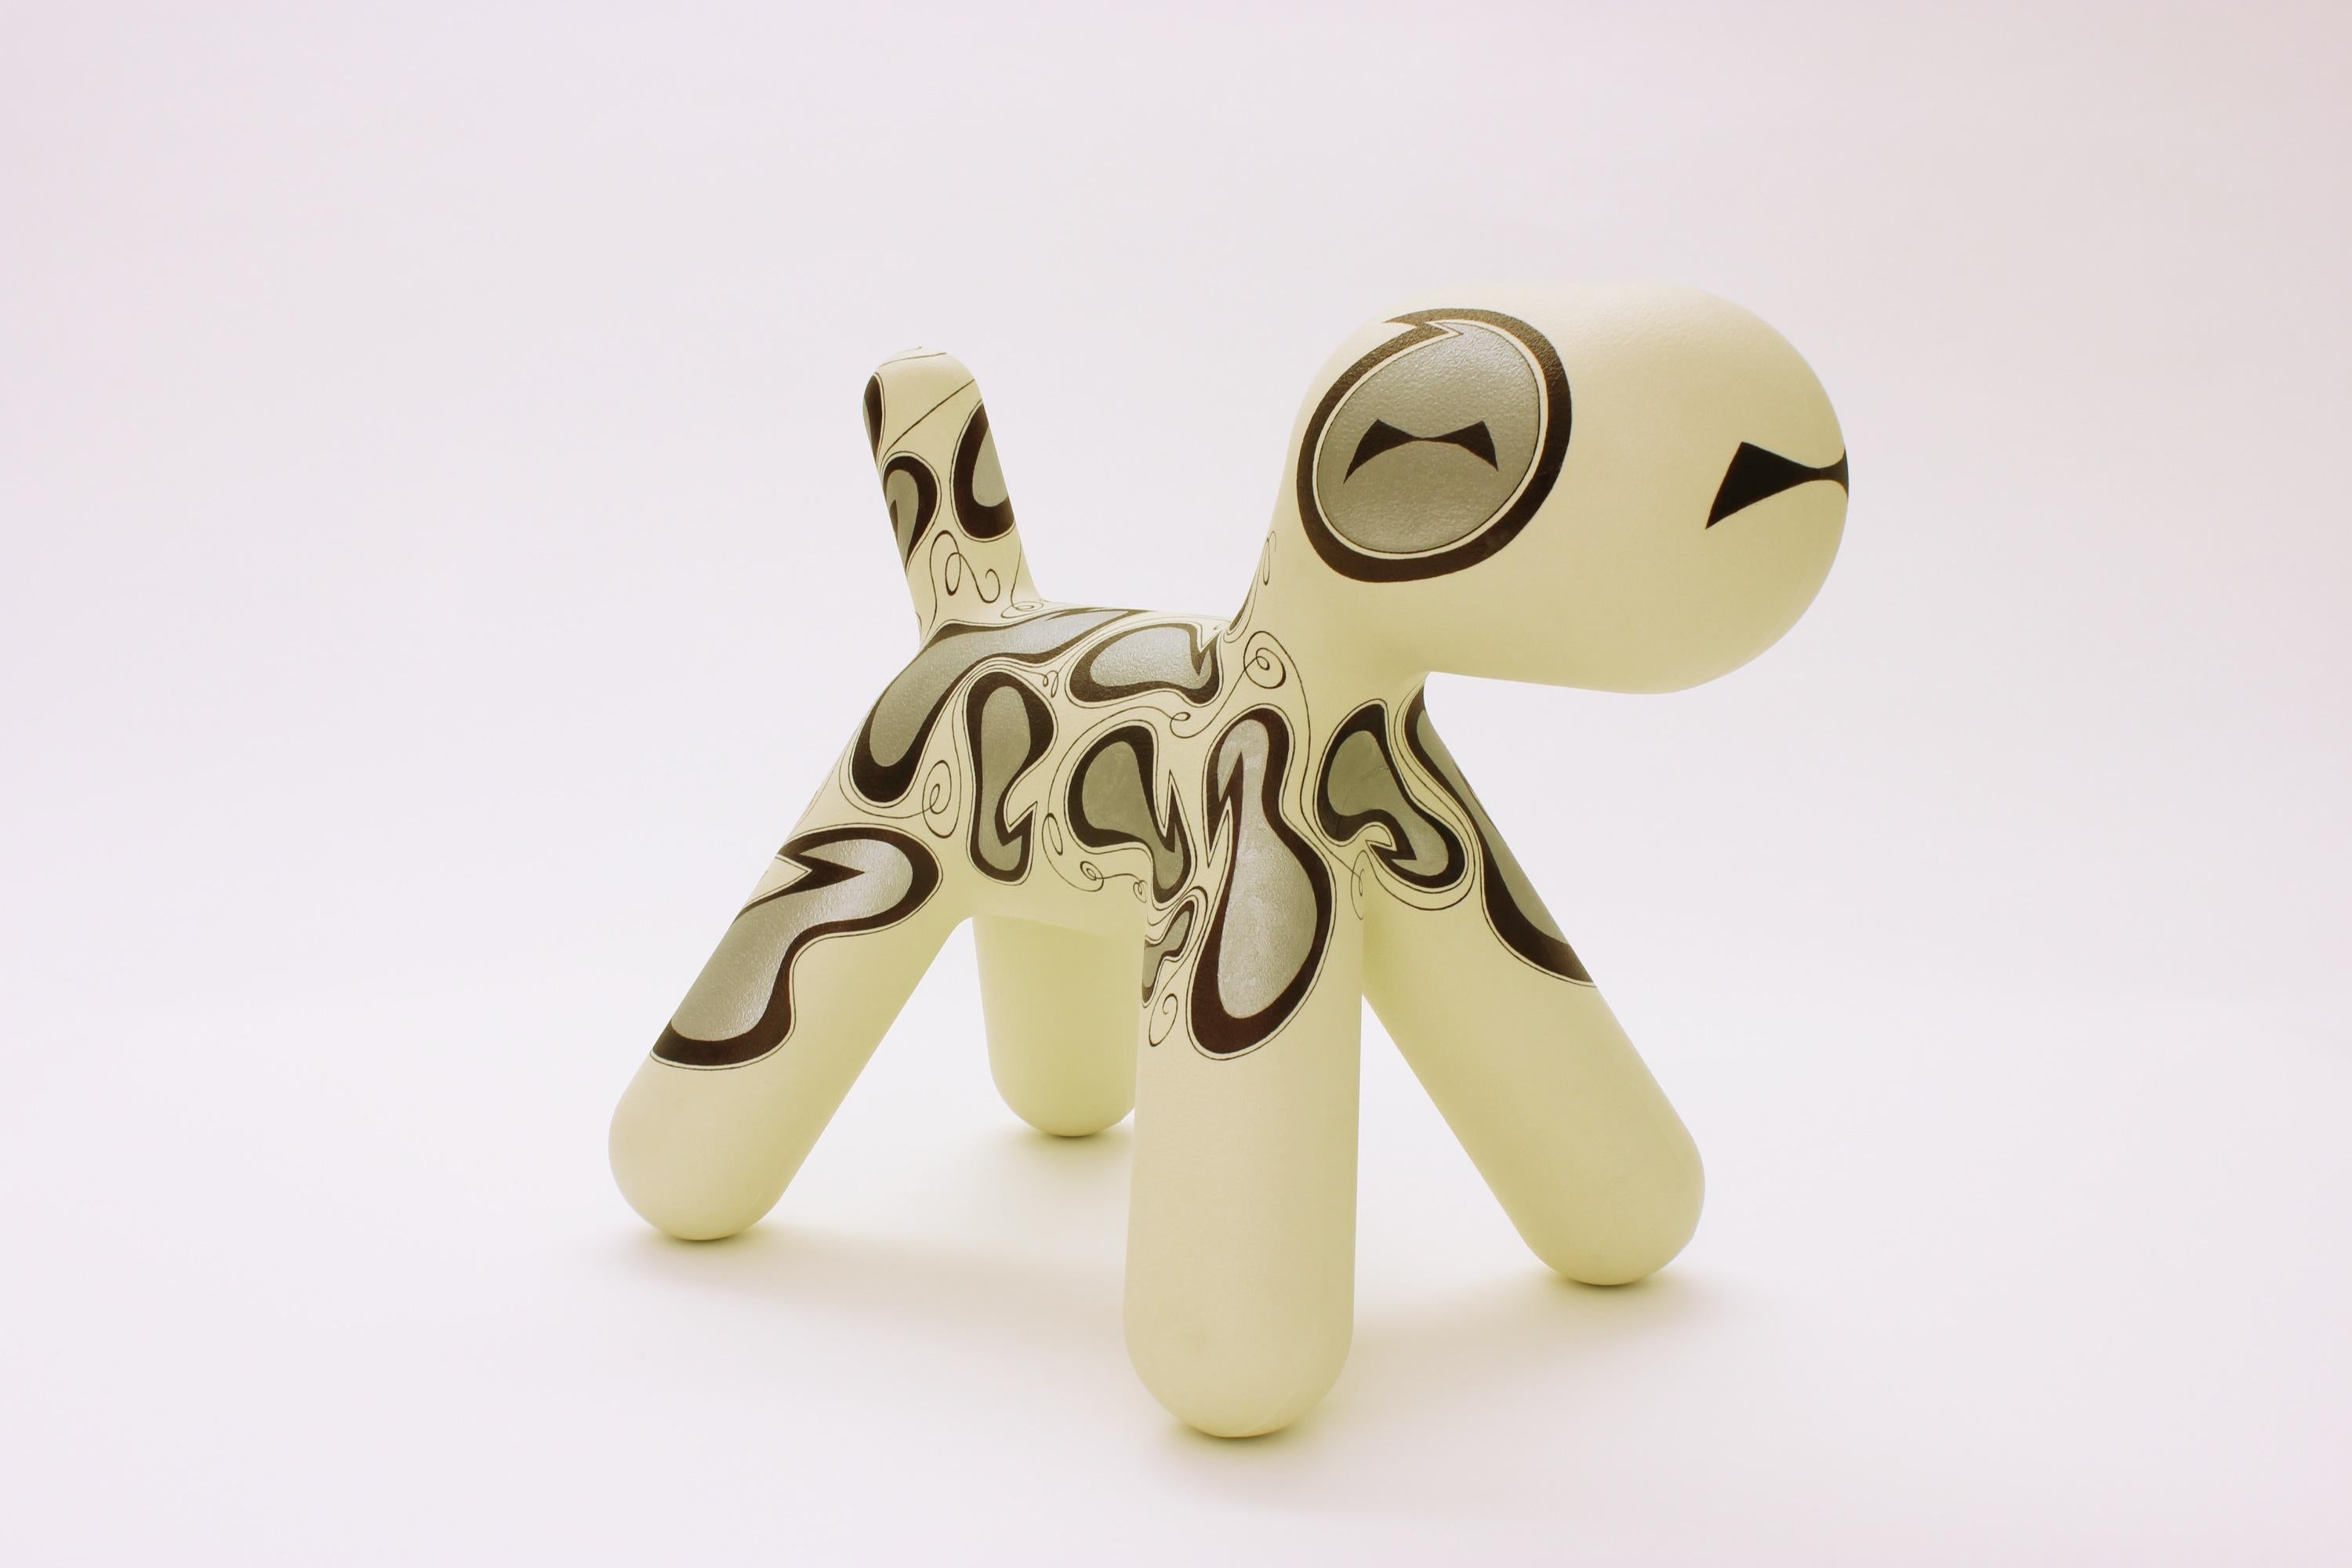 Puppy is a piece designed by Eero Aarnio for the Italian brand Magis. The contemporary art and design gallery Art321 invited different artists and designers to participate in a Puppy, the pieces were exhibited in the gallery and on the occasion of